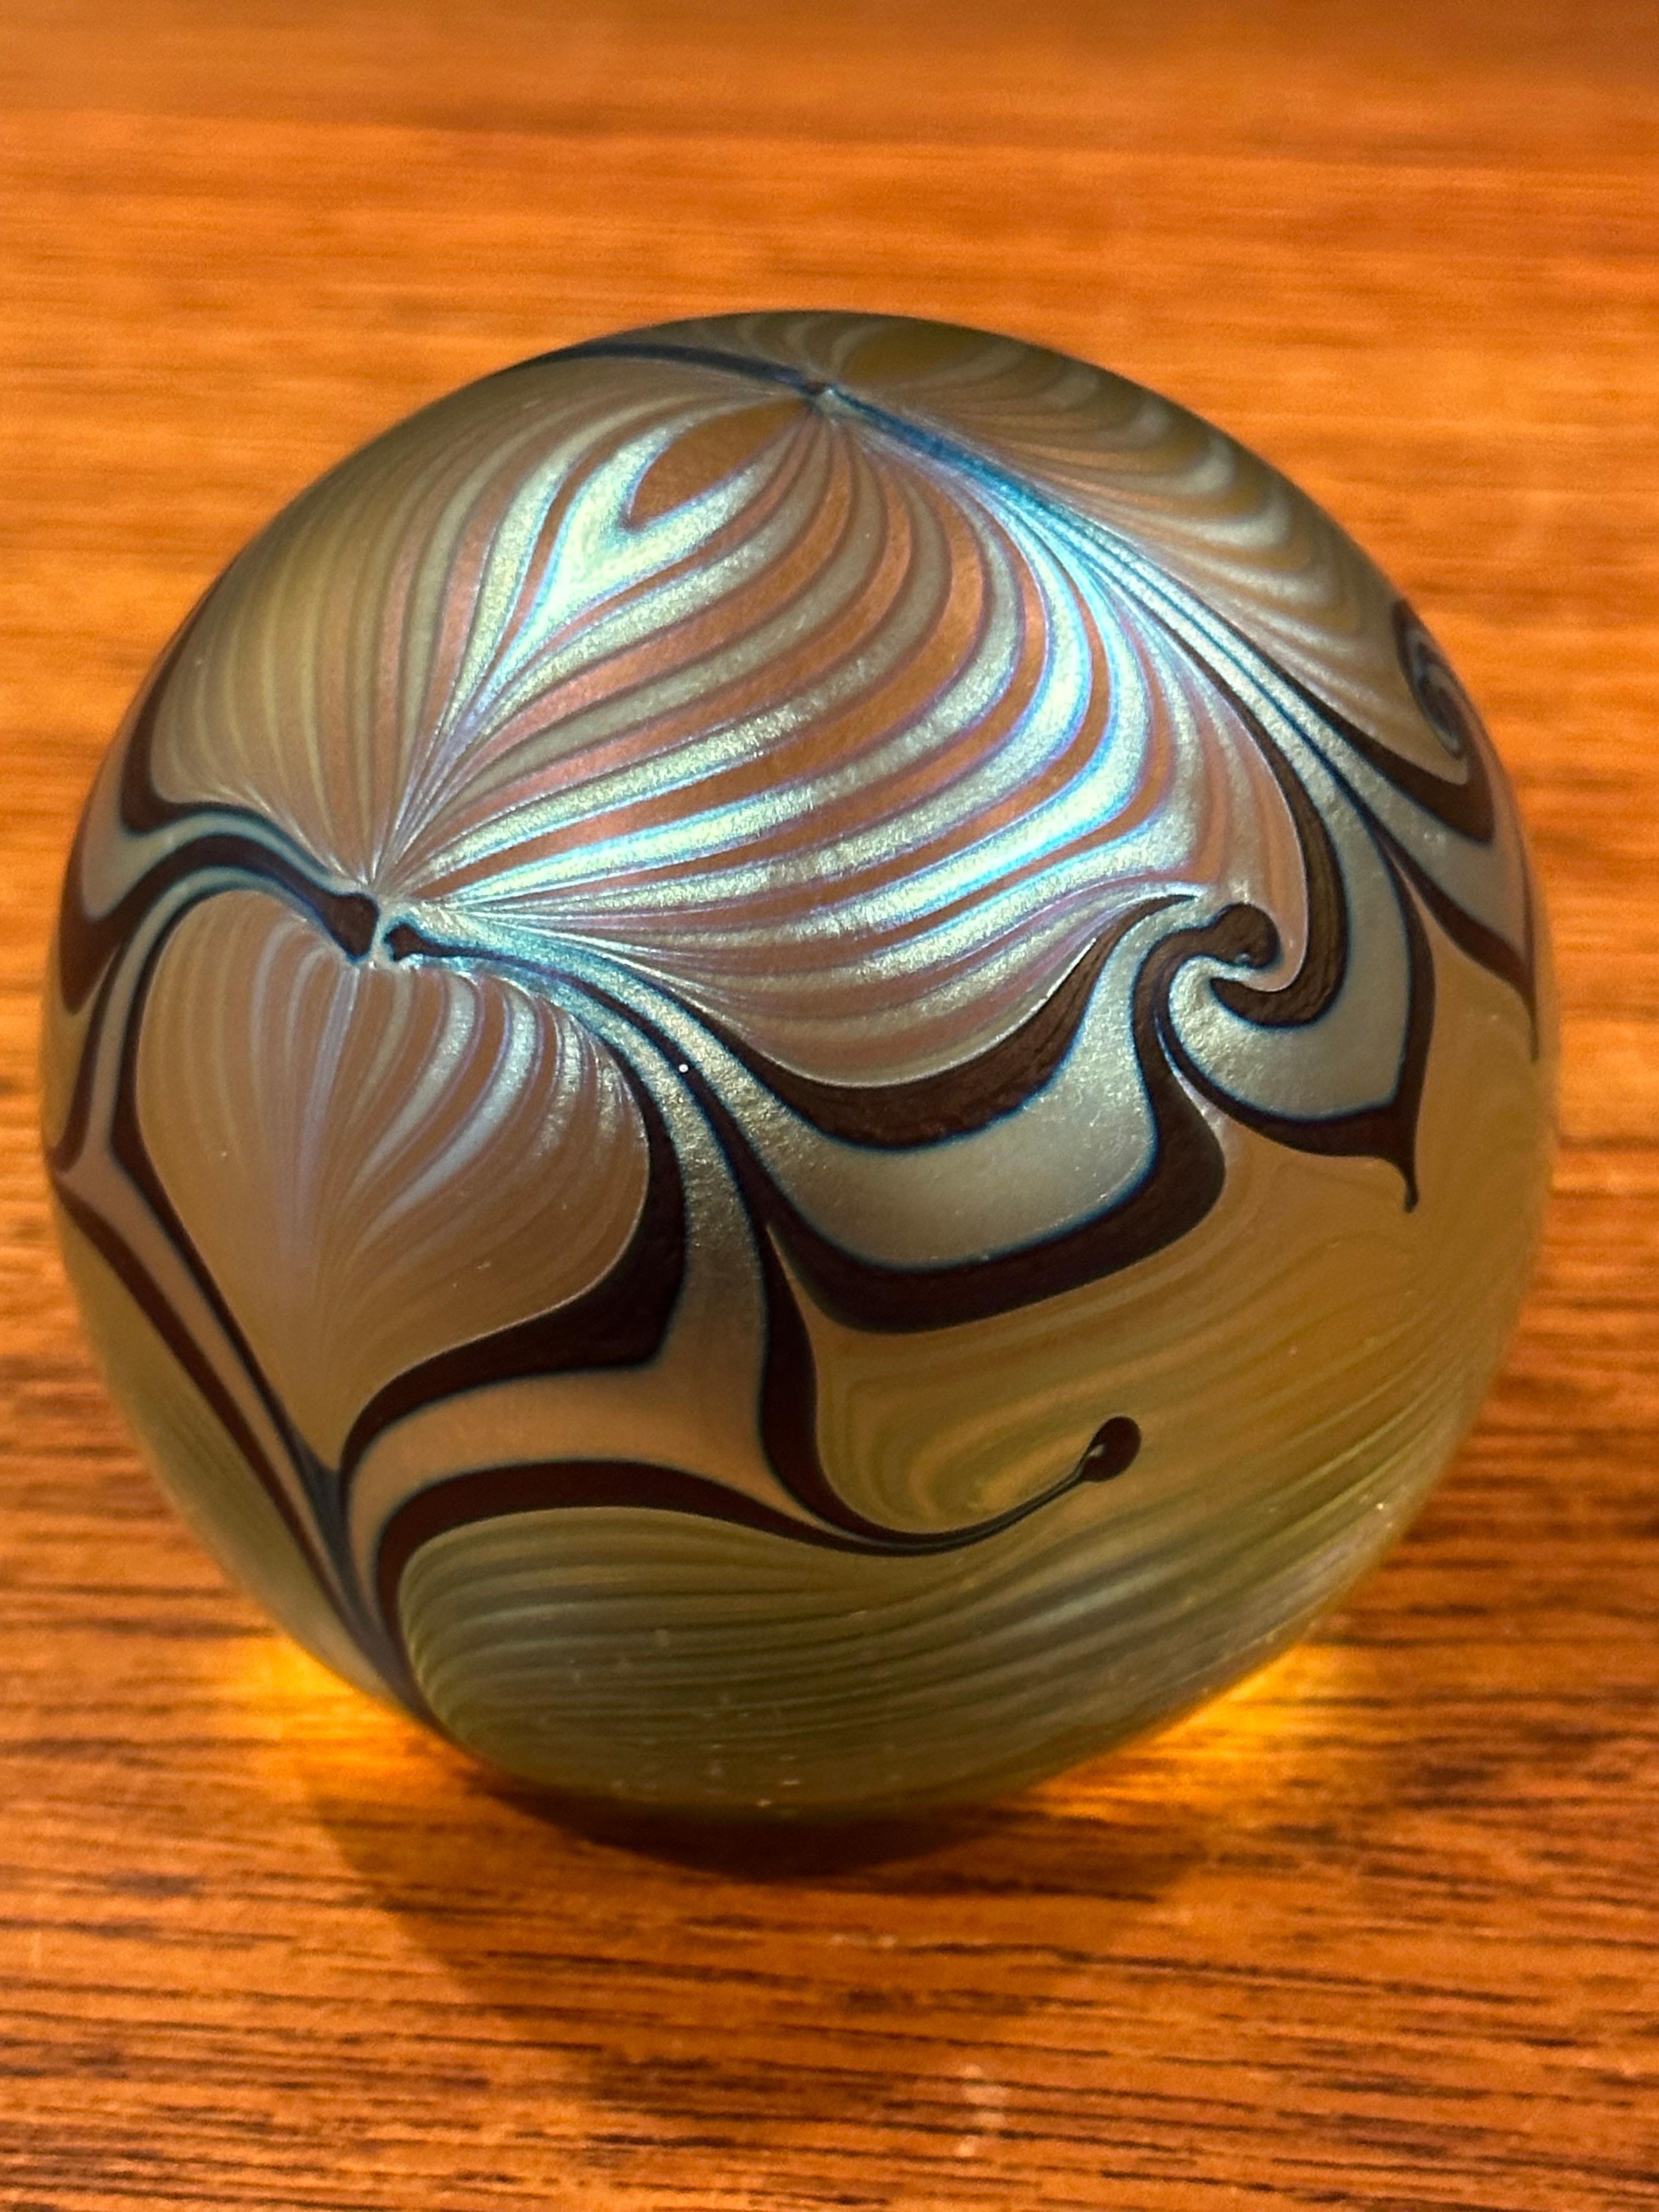 20th Century Iridescent Art Glass Paperweight by Steven Correia For Sale